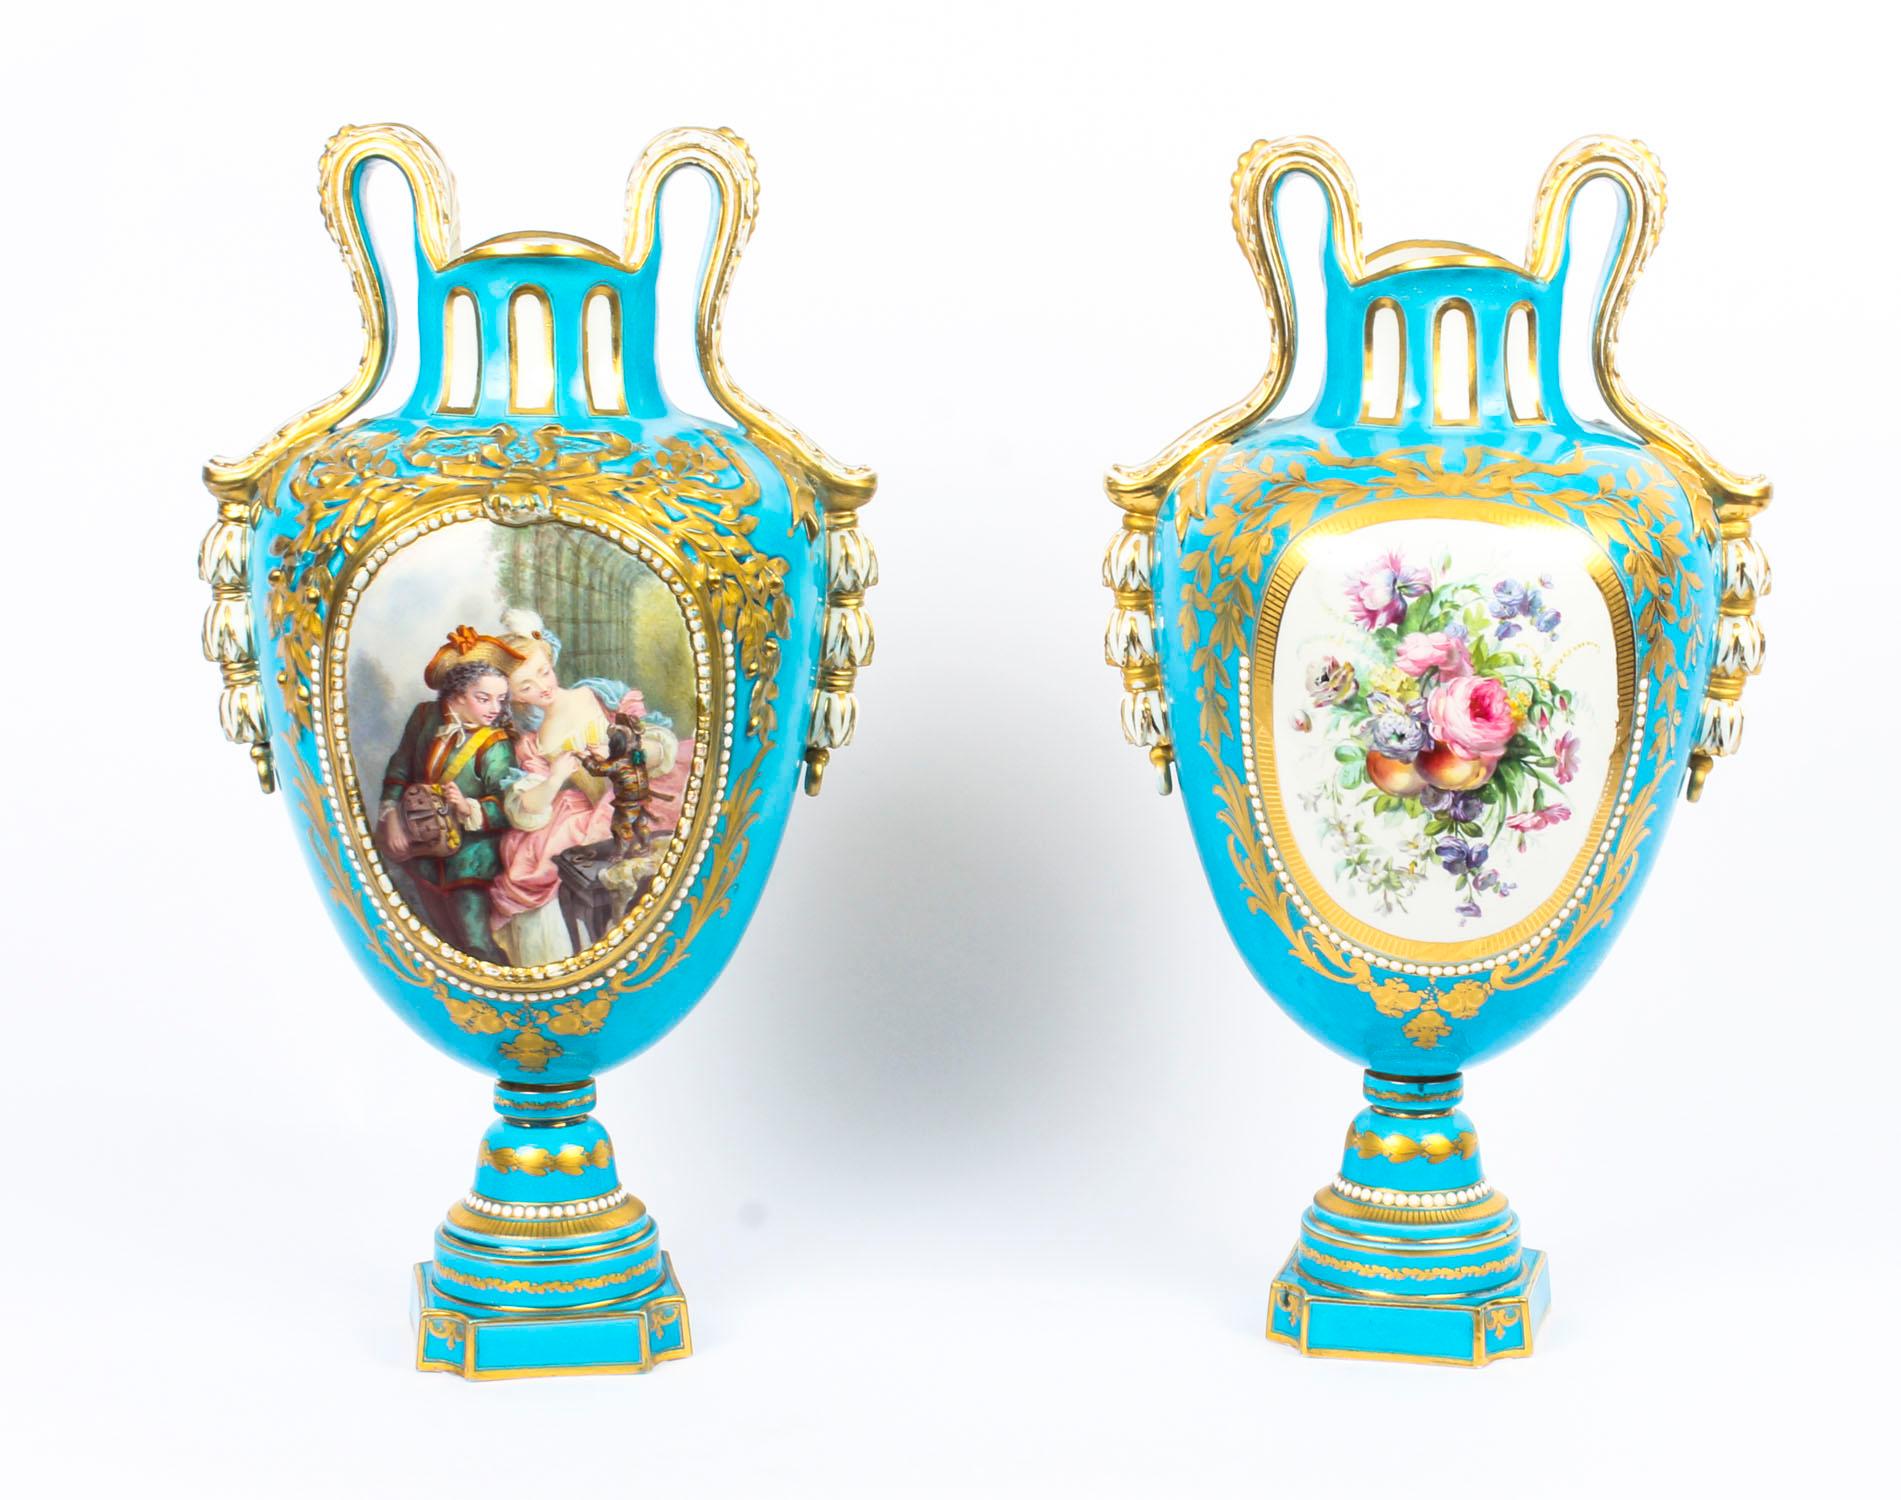 This fine and rare antique pair of French Sèvres porcelain vases bearing the Sèvres painted mark for 1765.

The decorative twin handle vases are superbly decorated with high-quality hand-painted panels of romantic domestic scenes of children playing